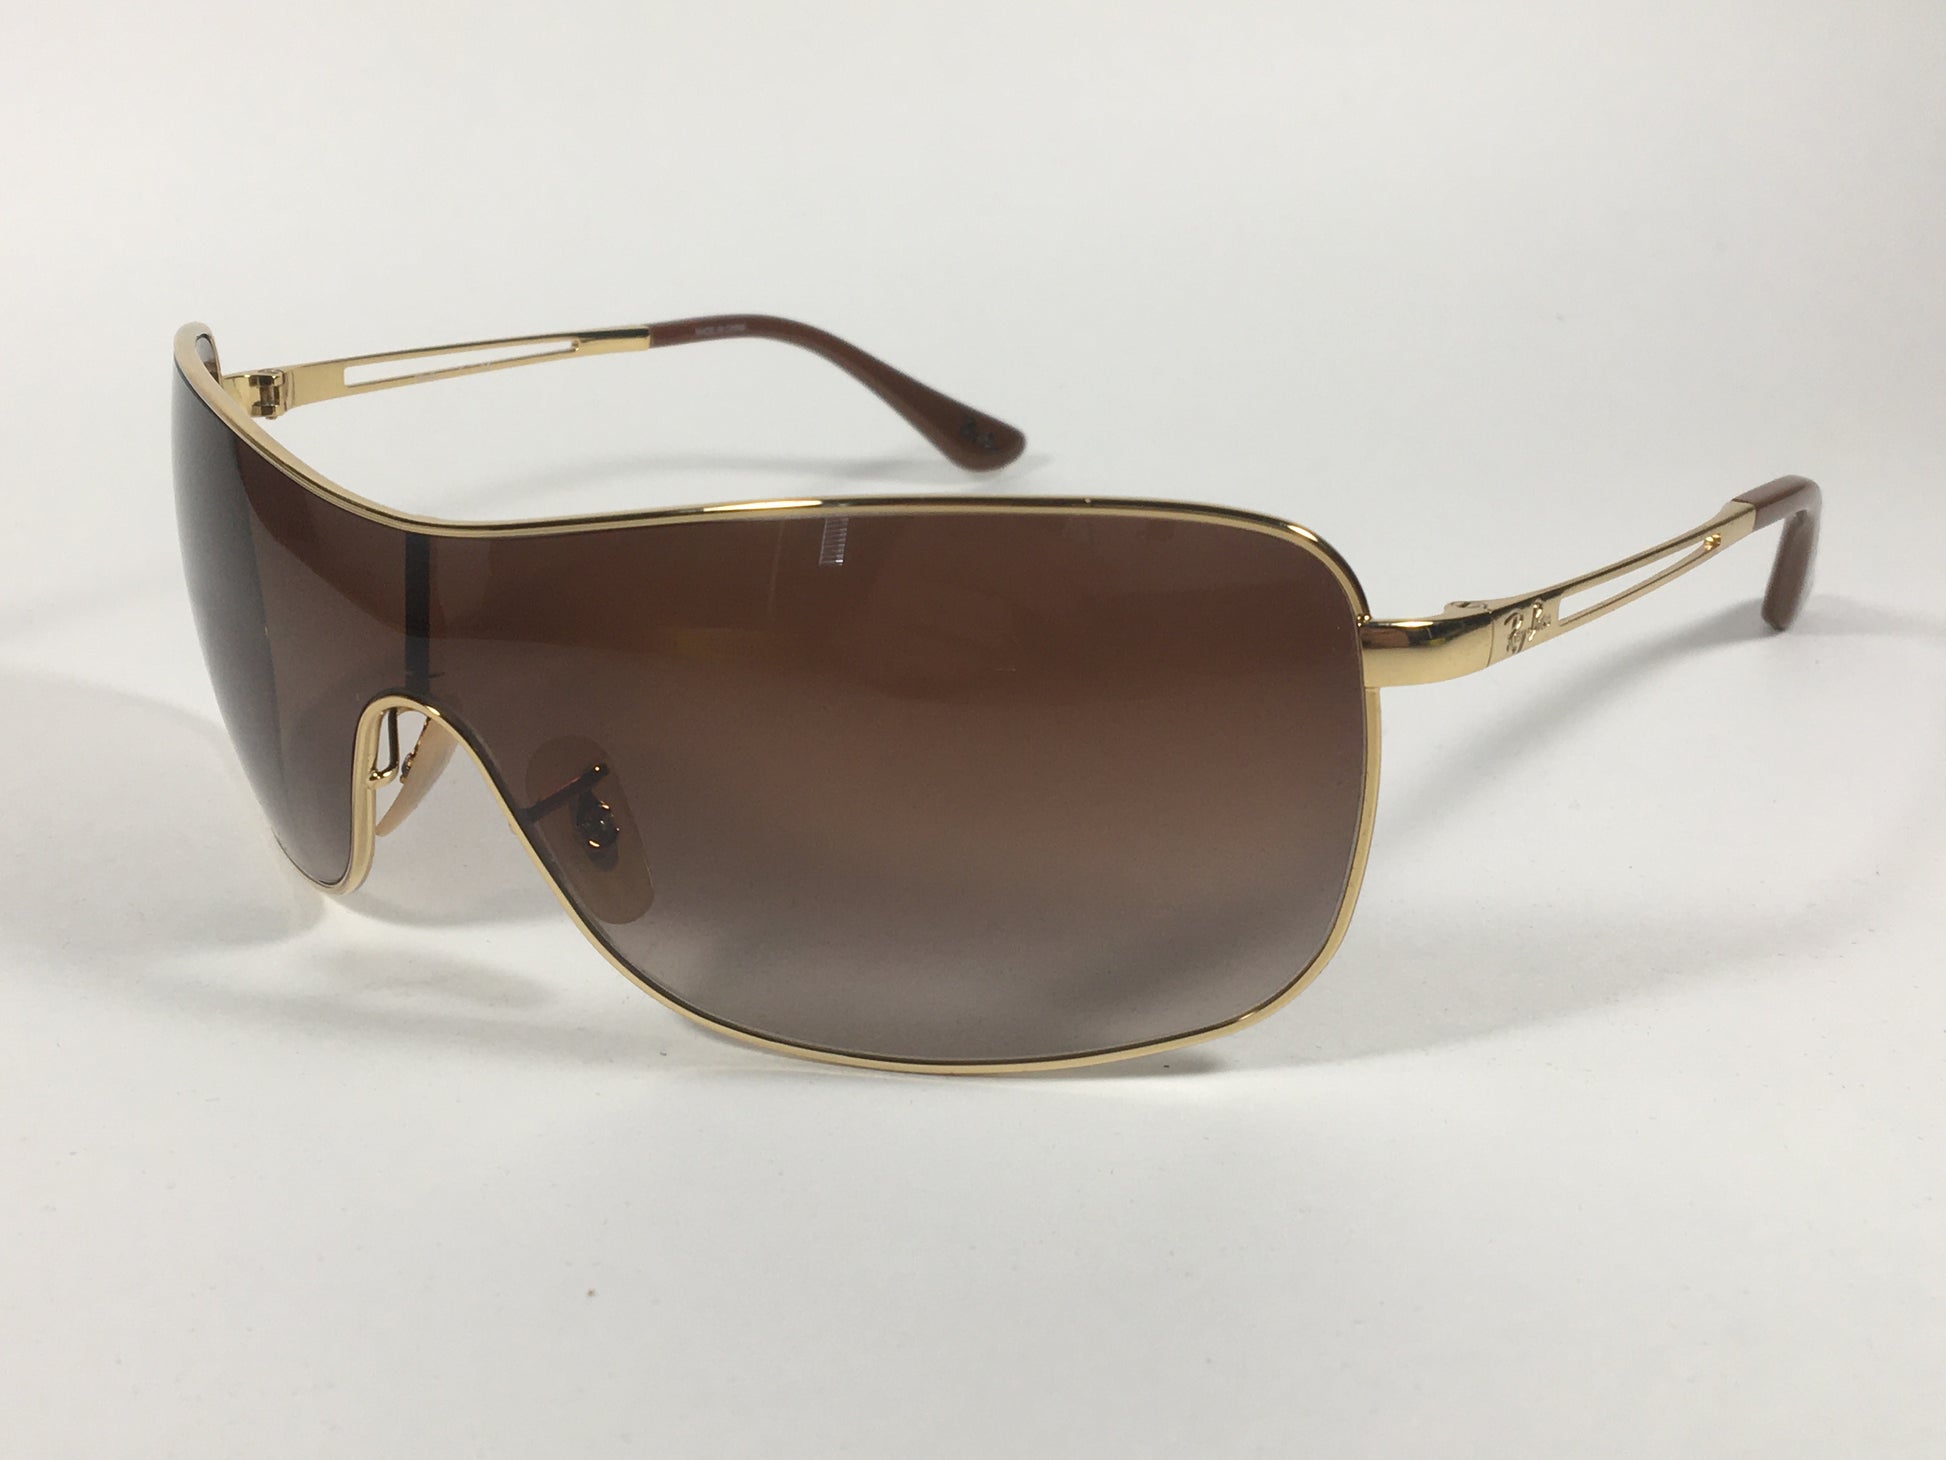 Ray-Ban RB3466 001/13 Shield Sunglasses Gold Metal Frame Brown Gradient Lens - Sunglasses